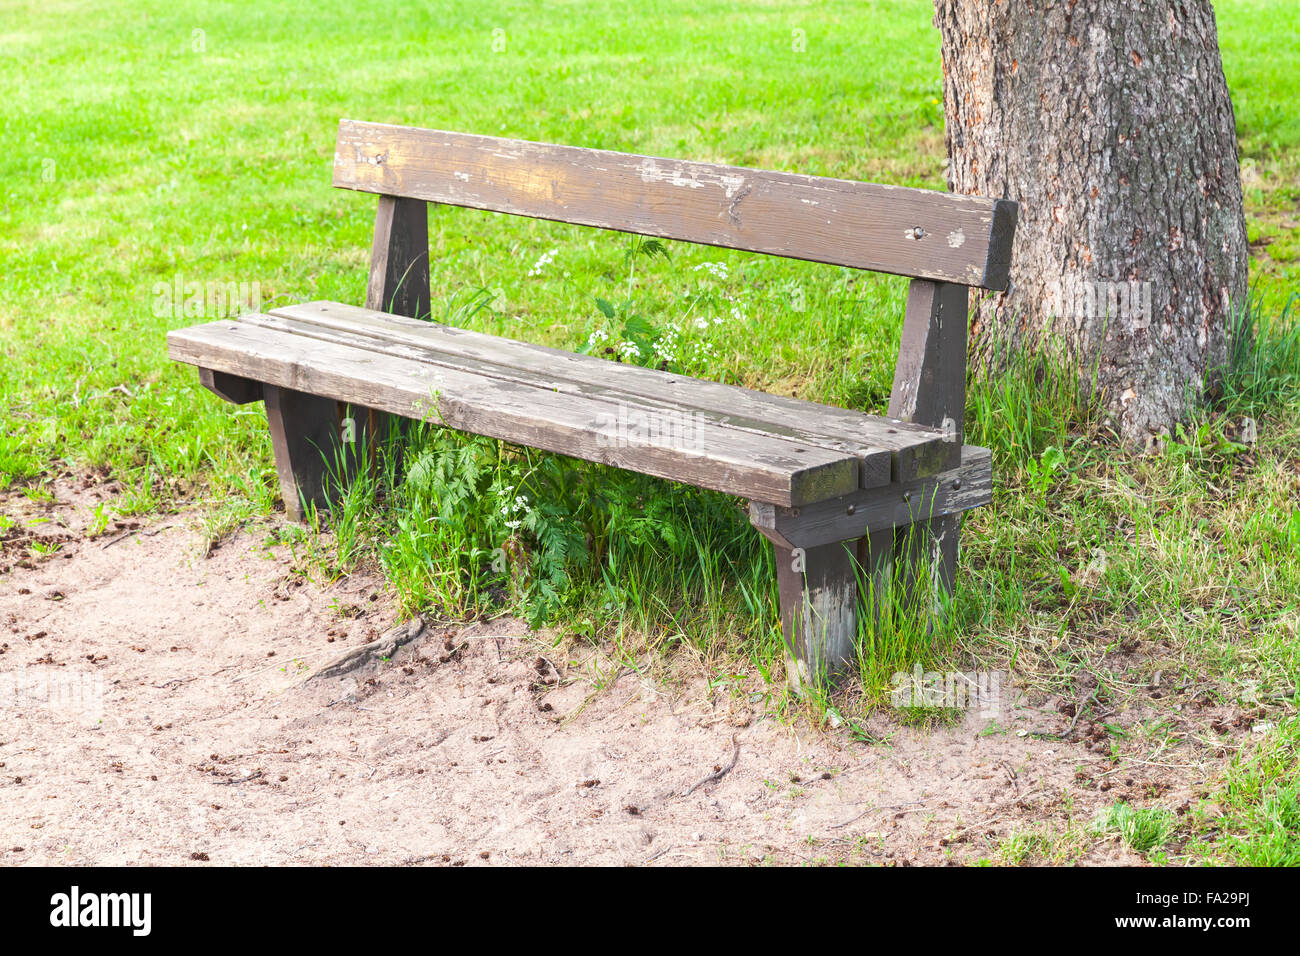 Old wooden bench on roadside in summer park Stock Photo